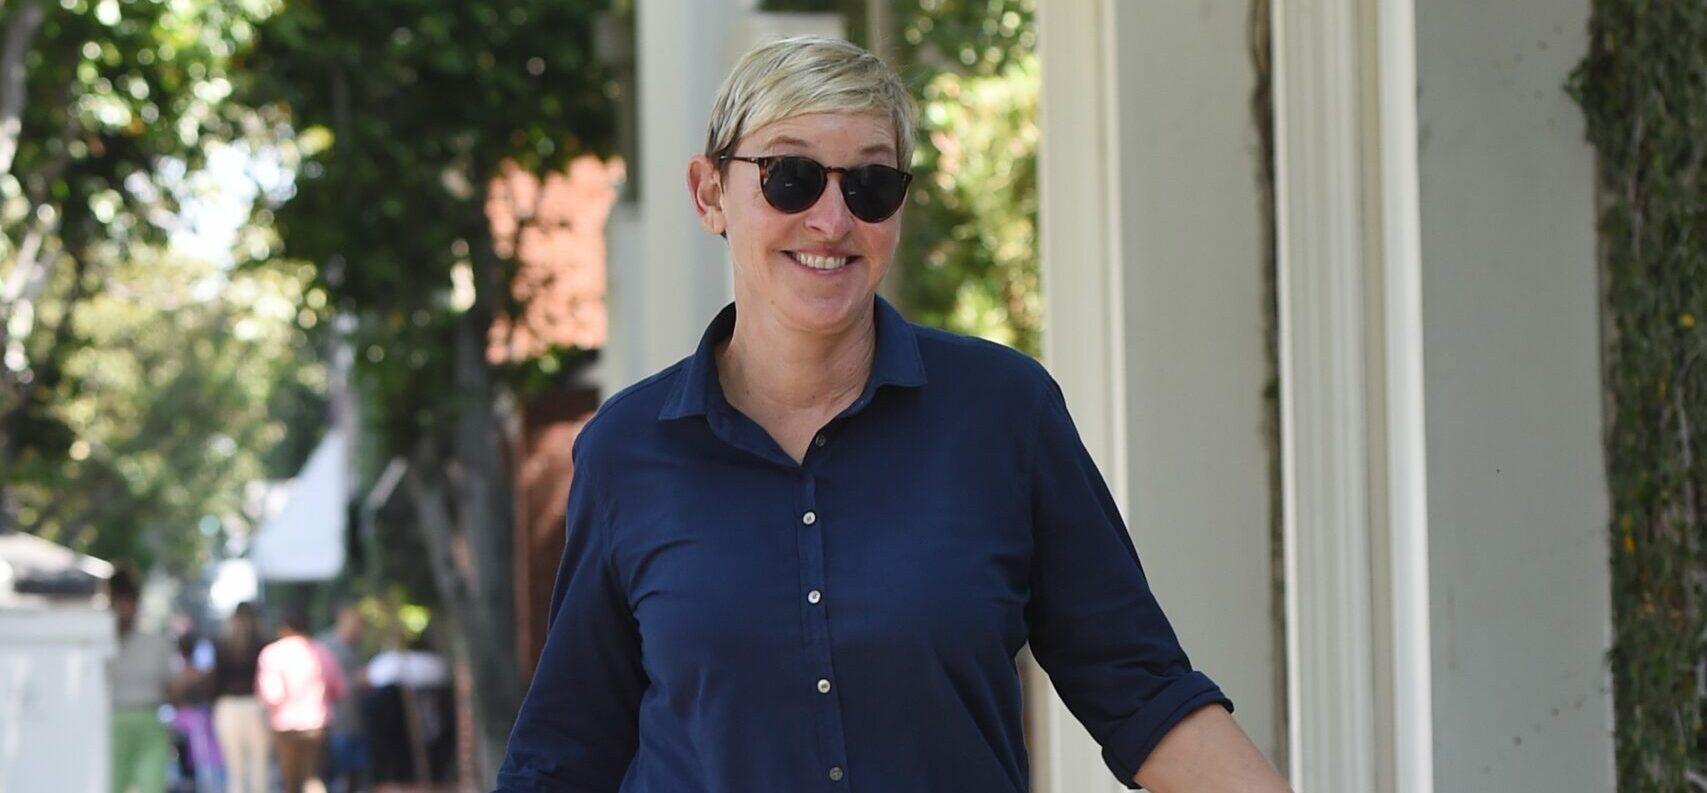 Ellen DeGeneres is all smiles as she is spotted running errands around town